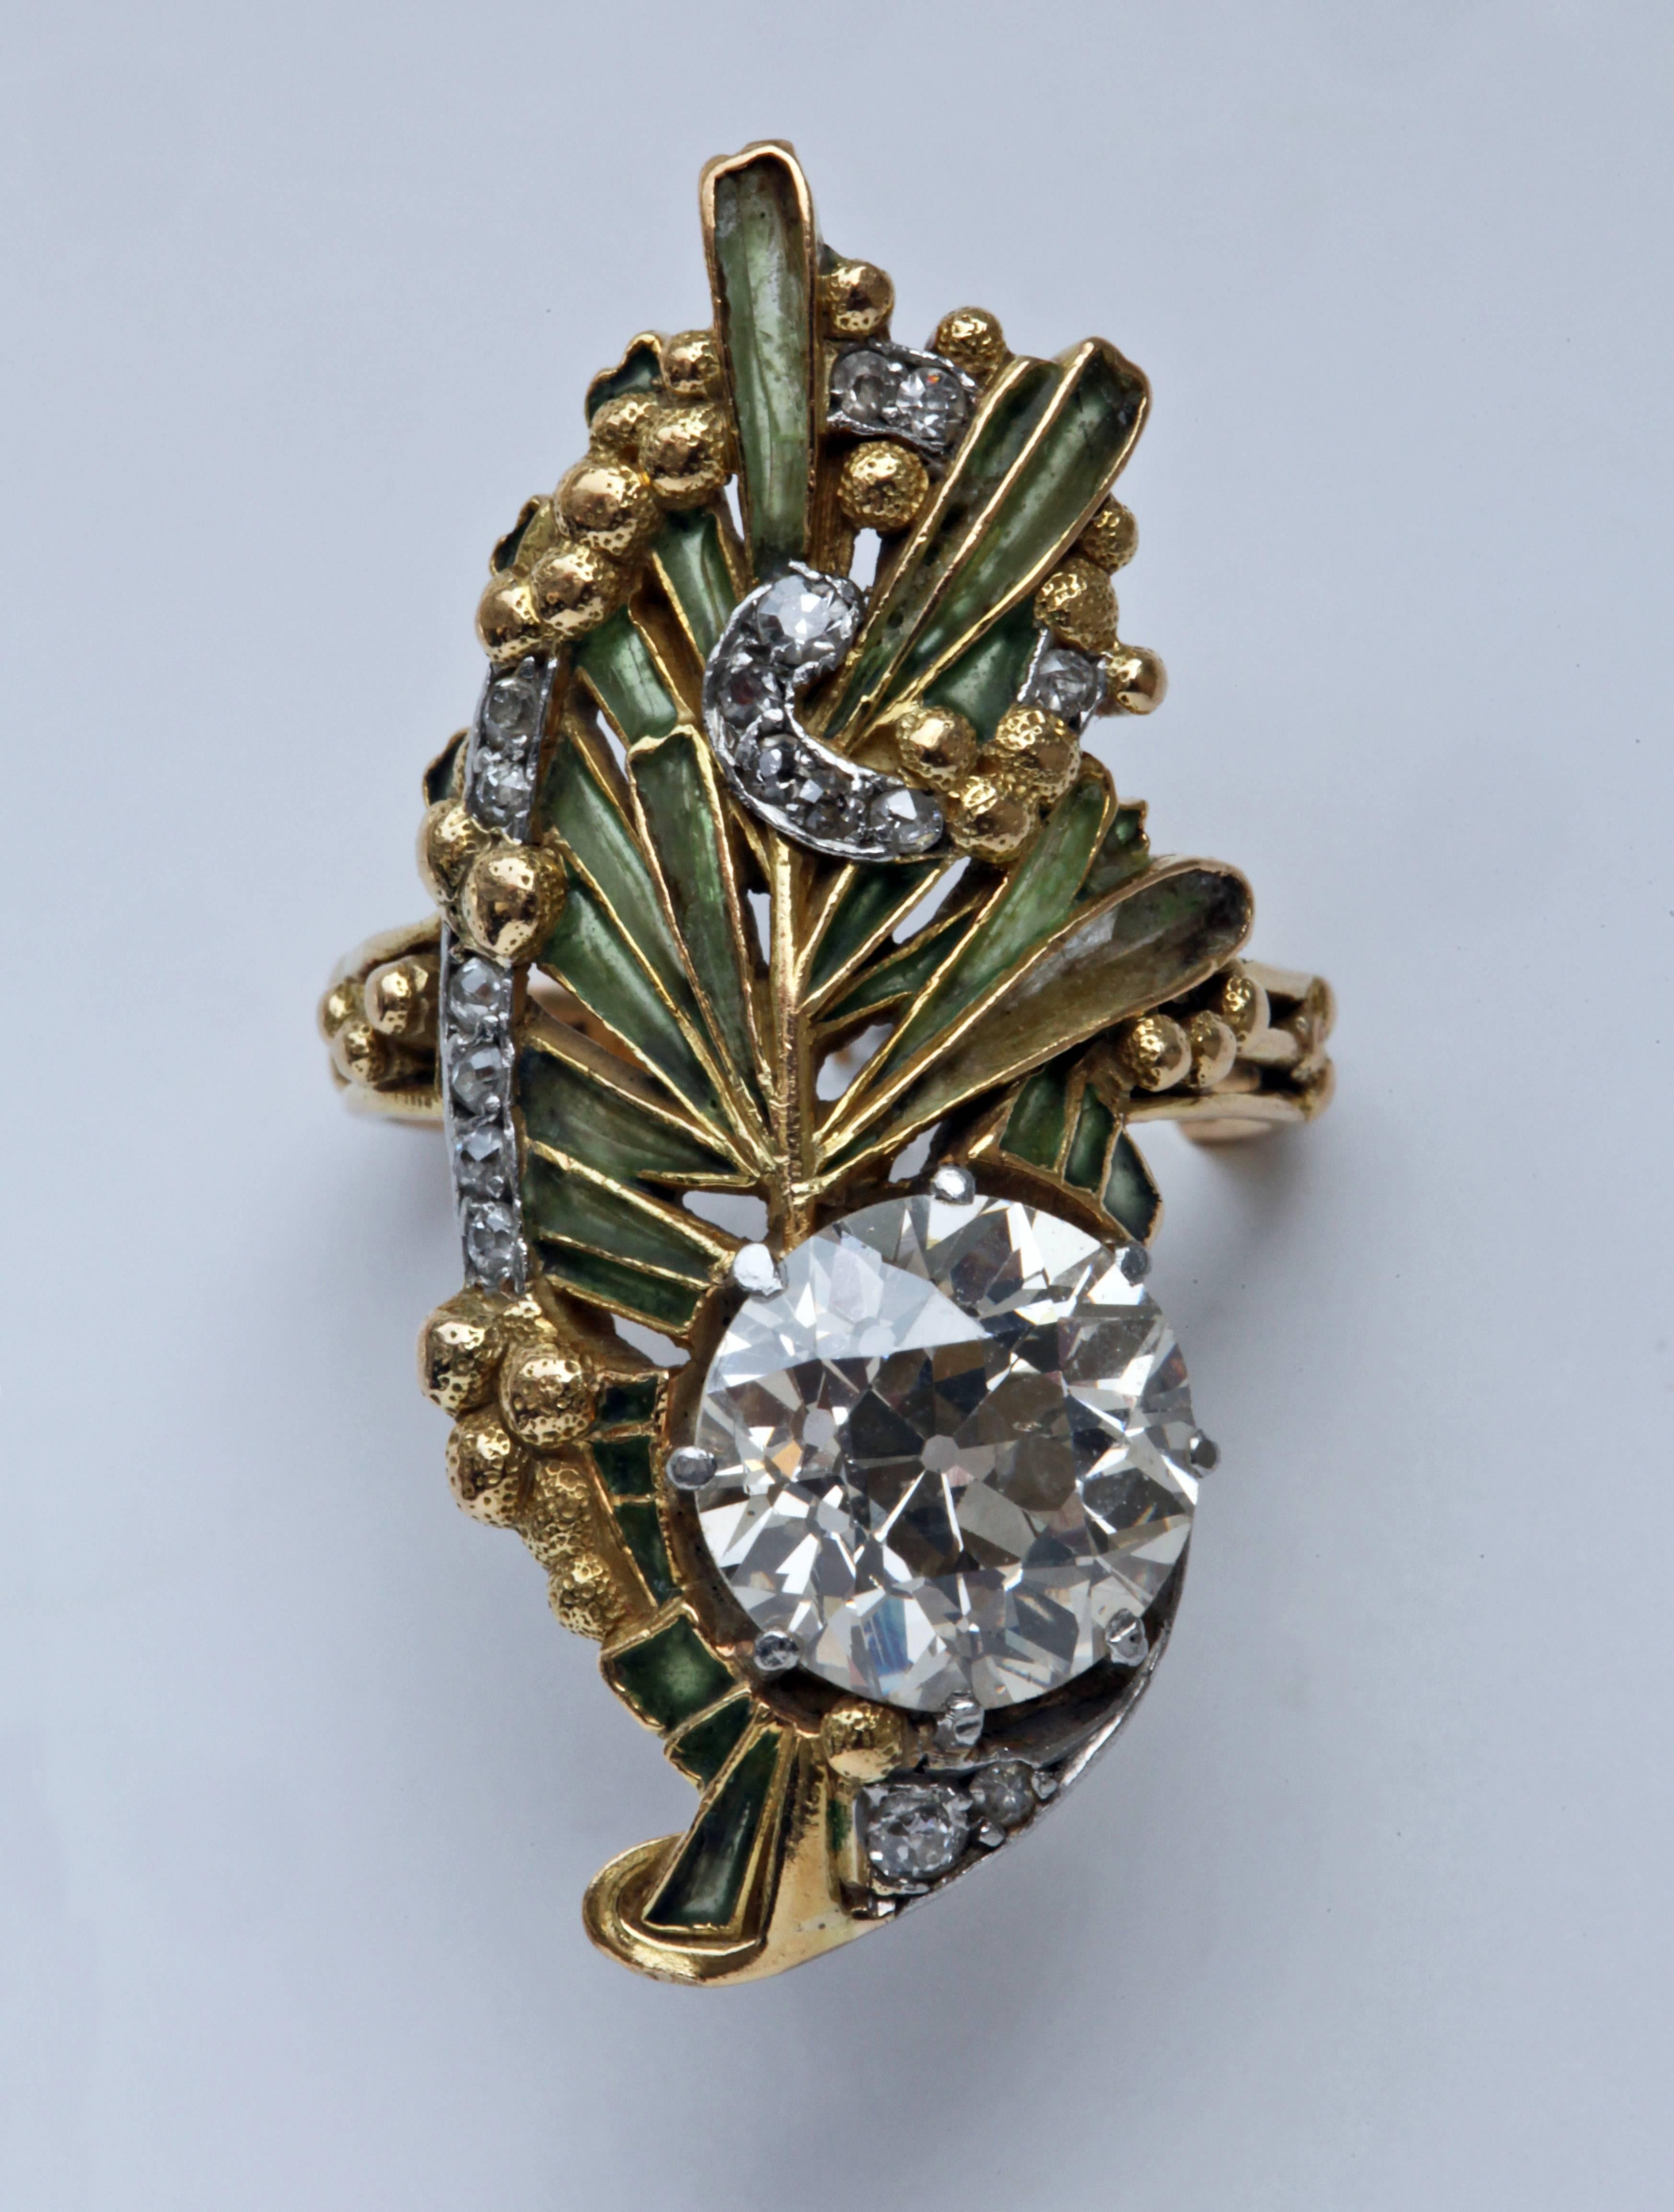 The extremely fine design & workmanship is typical of a René Lalique / Louis Aucoc creation.
A superb example of the finest Parisian jewelers art from the 1900's in gold, plique-à-jour enamel & diamond.
The stunning Japonism influenced design